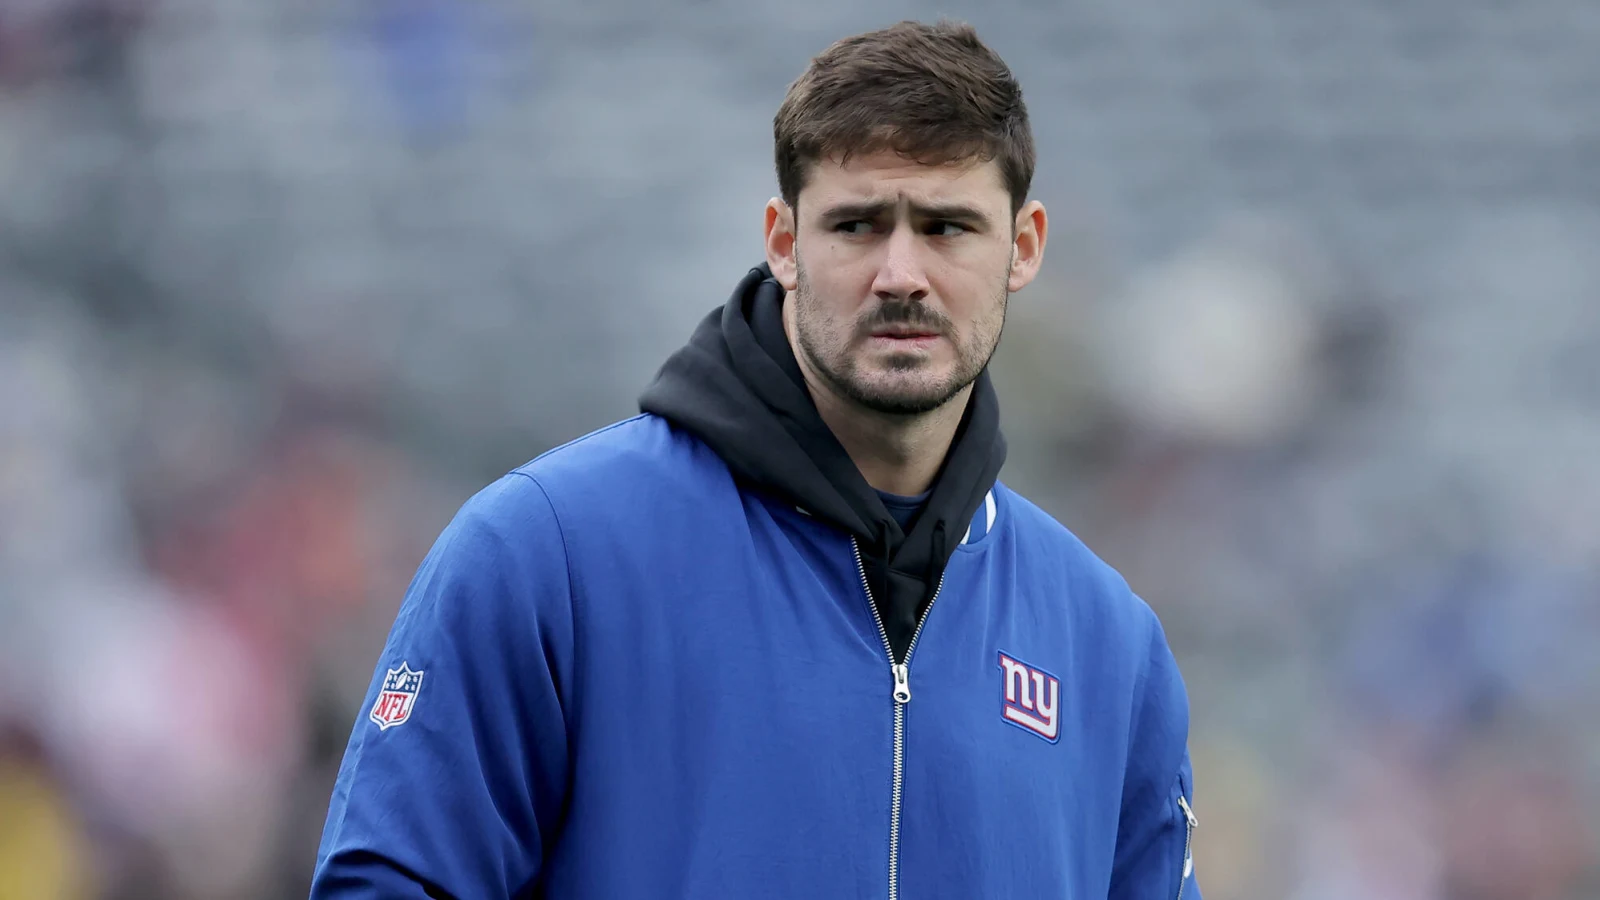 Giants at a Crossroads The Uncertain Future of Daniel Jones and Draft Speculations